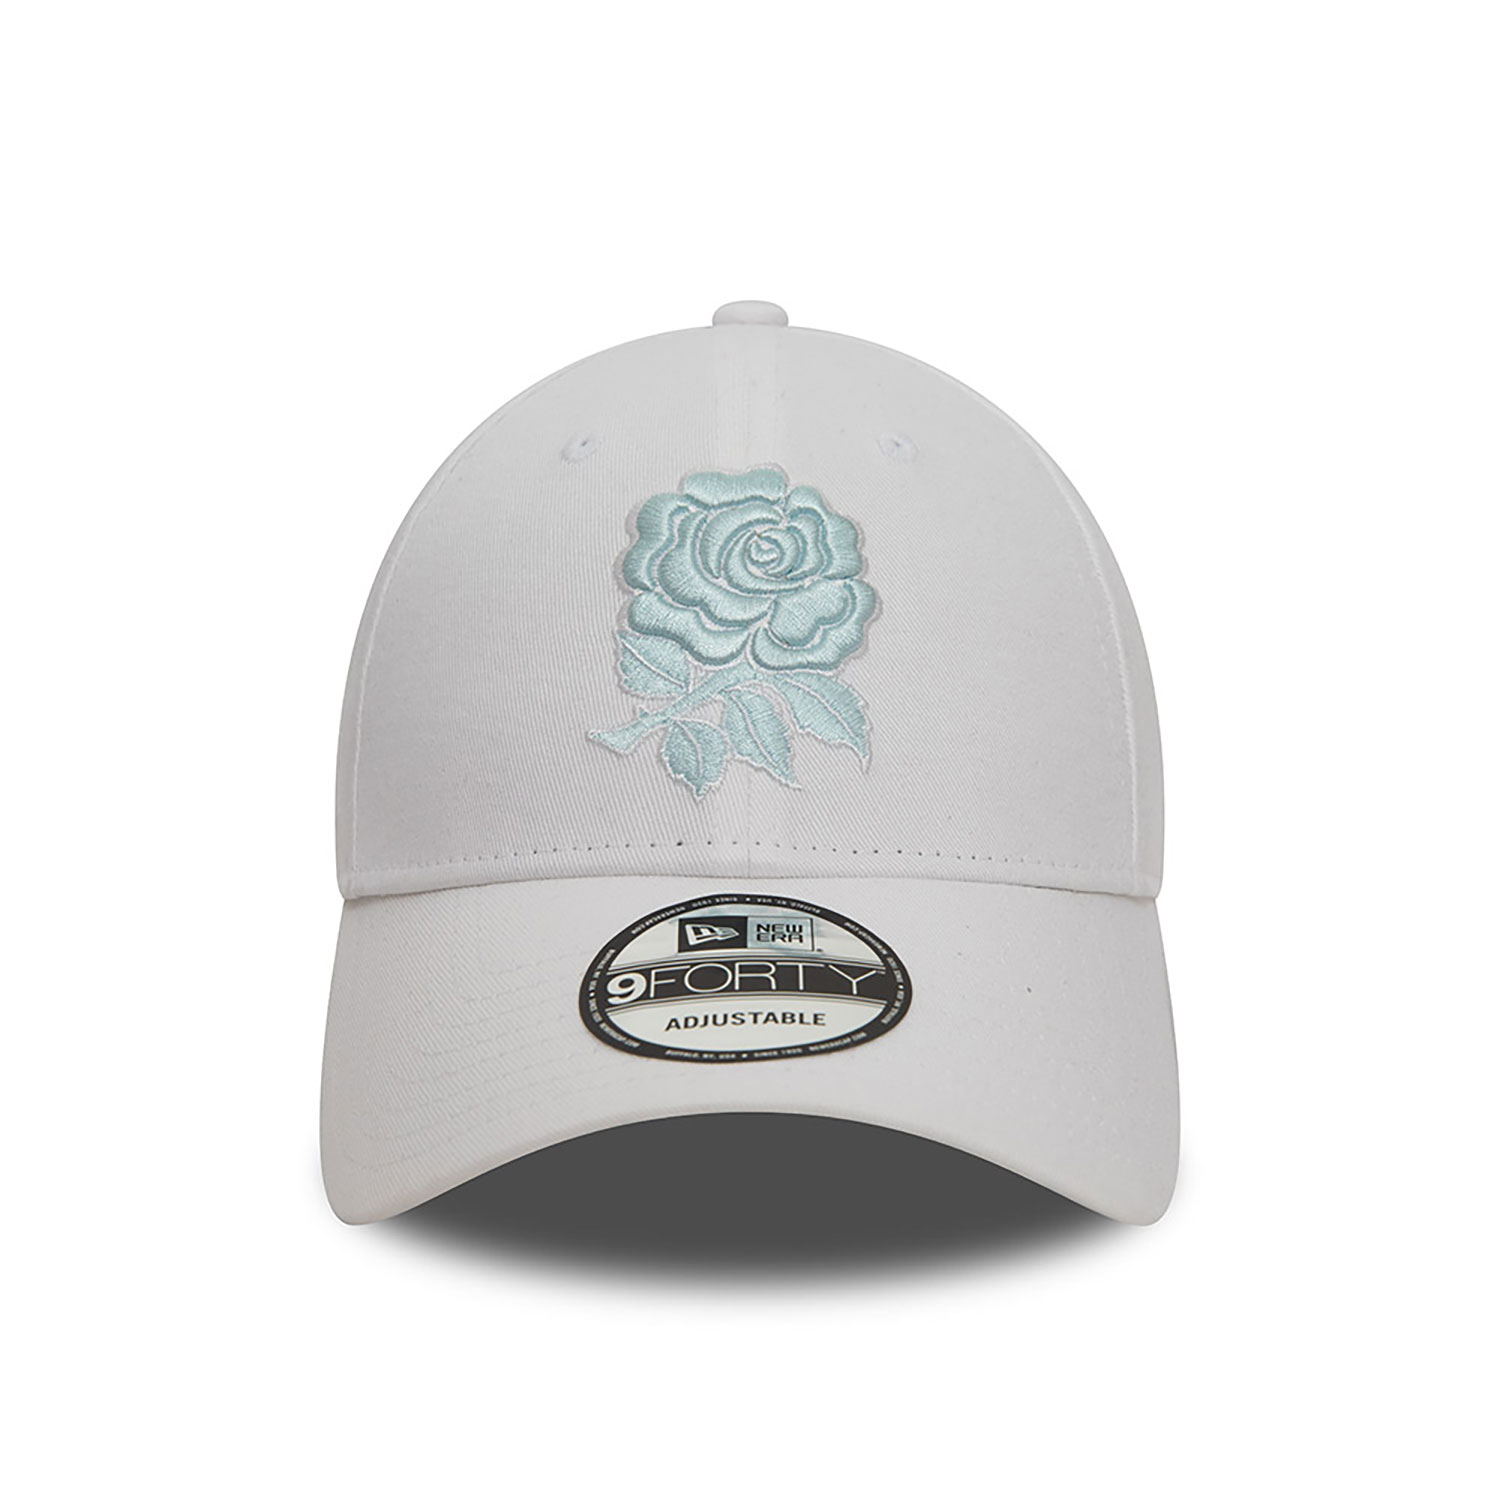 Rugby Football Union Kit Hookup White 9FORTY Adjustable Cap